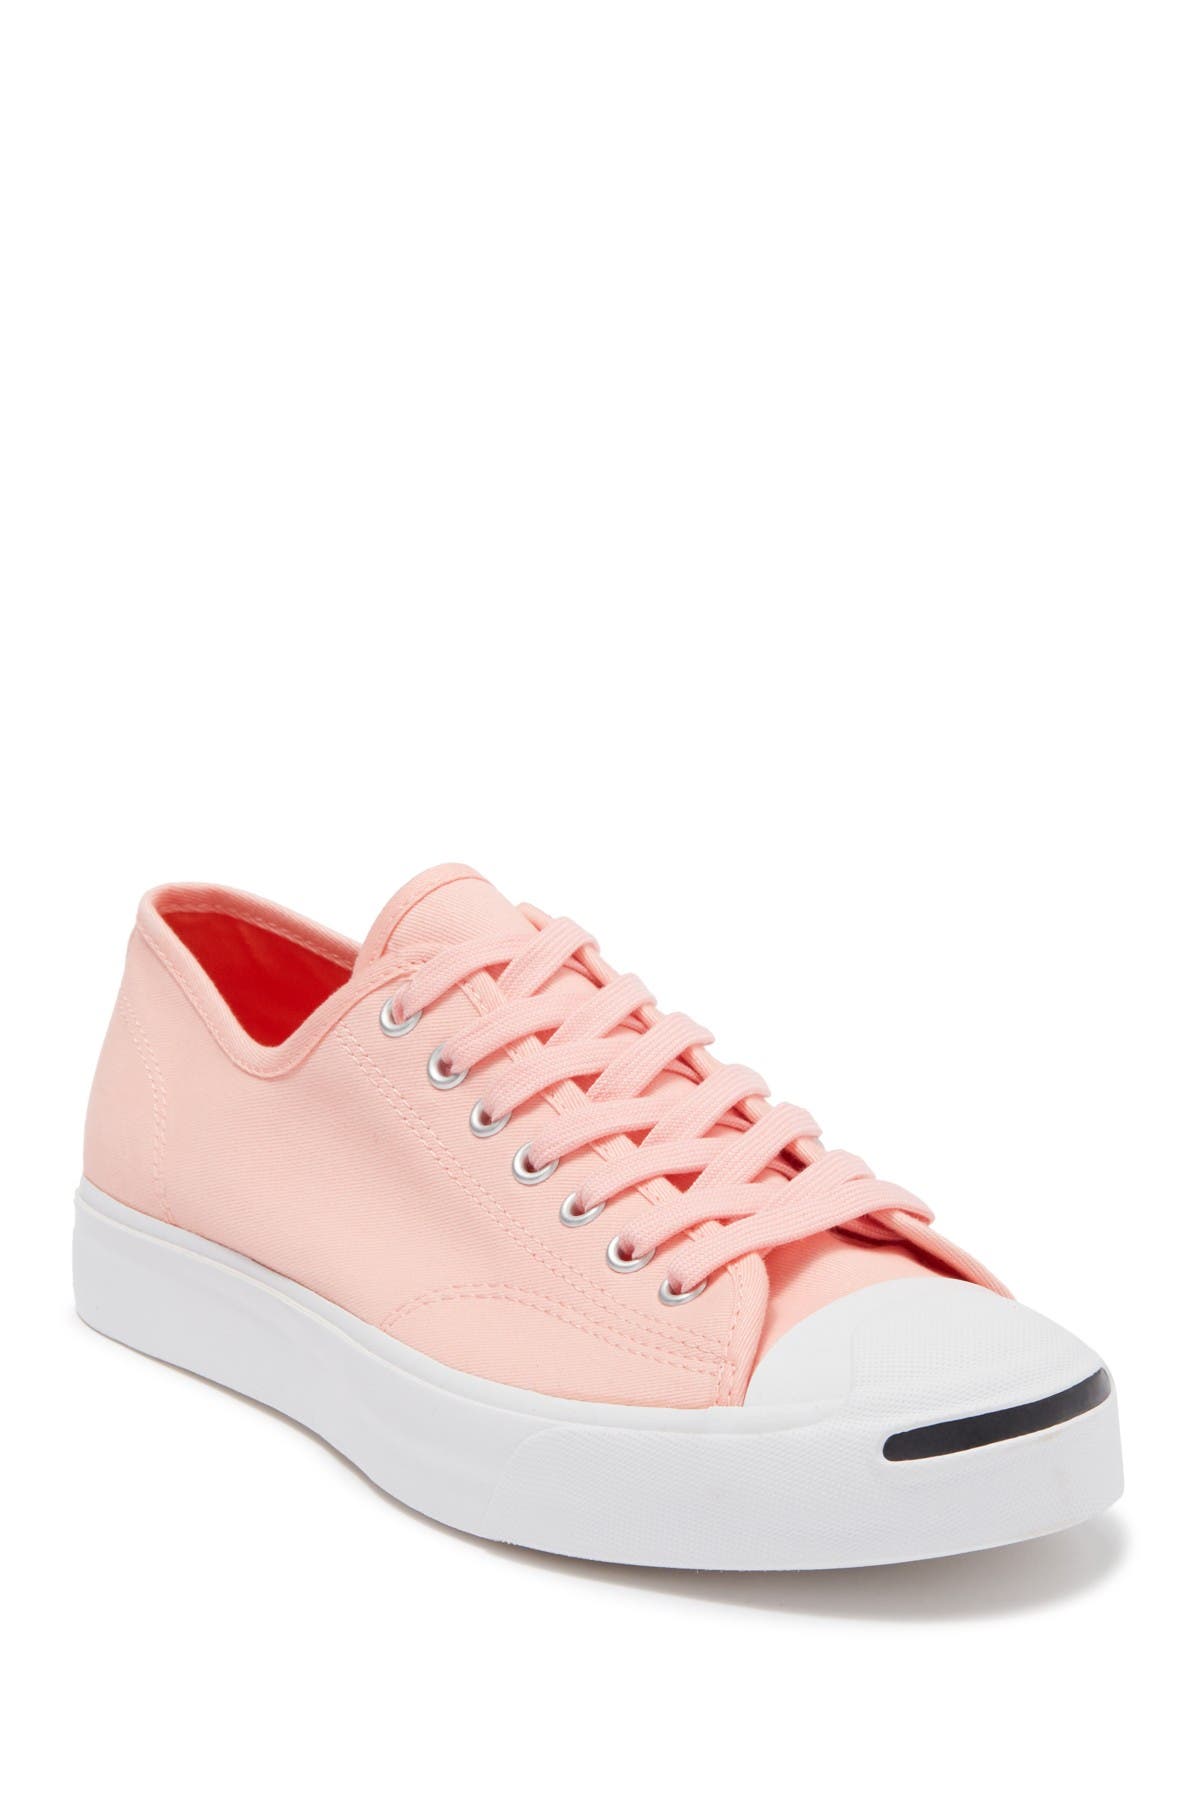 Converse | Jack Purcell Oxford Sneaker 